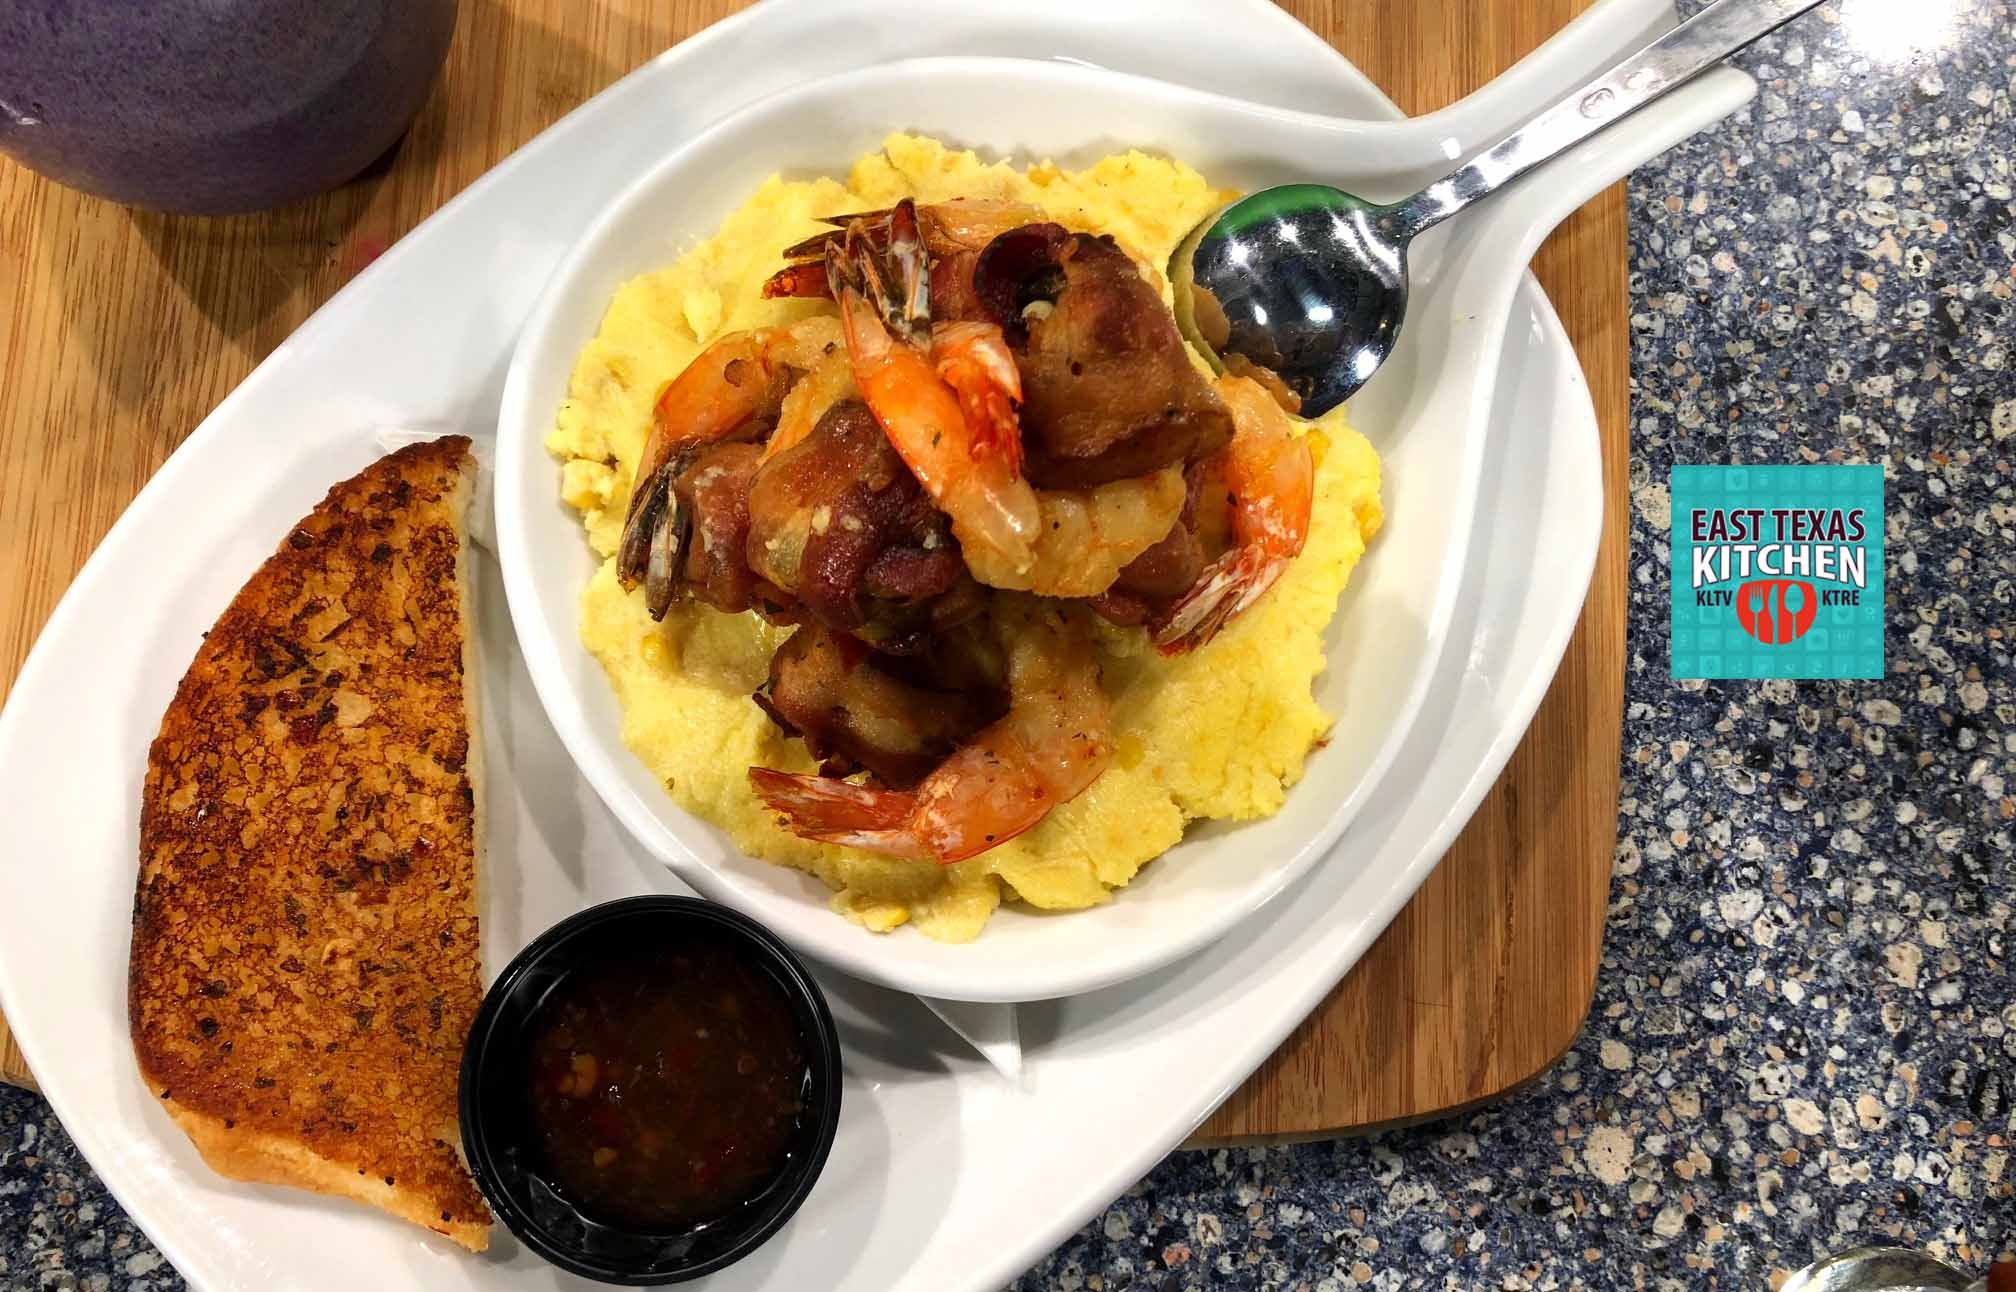 Shrimp and Grits by Walk-Ons Bistreaux